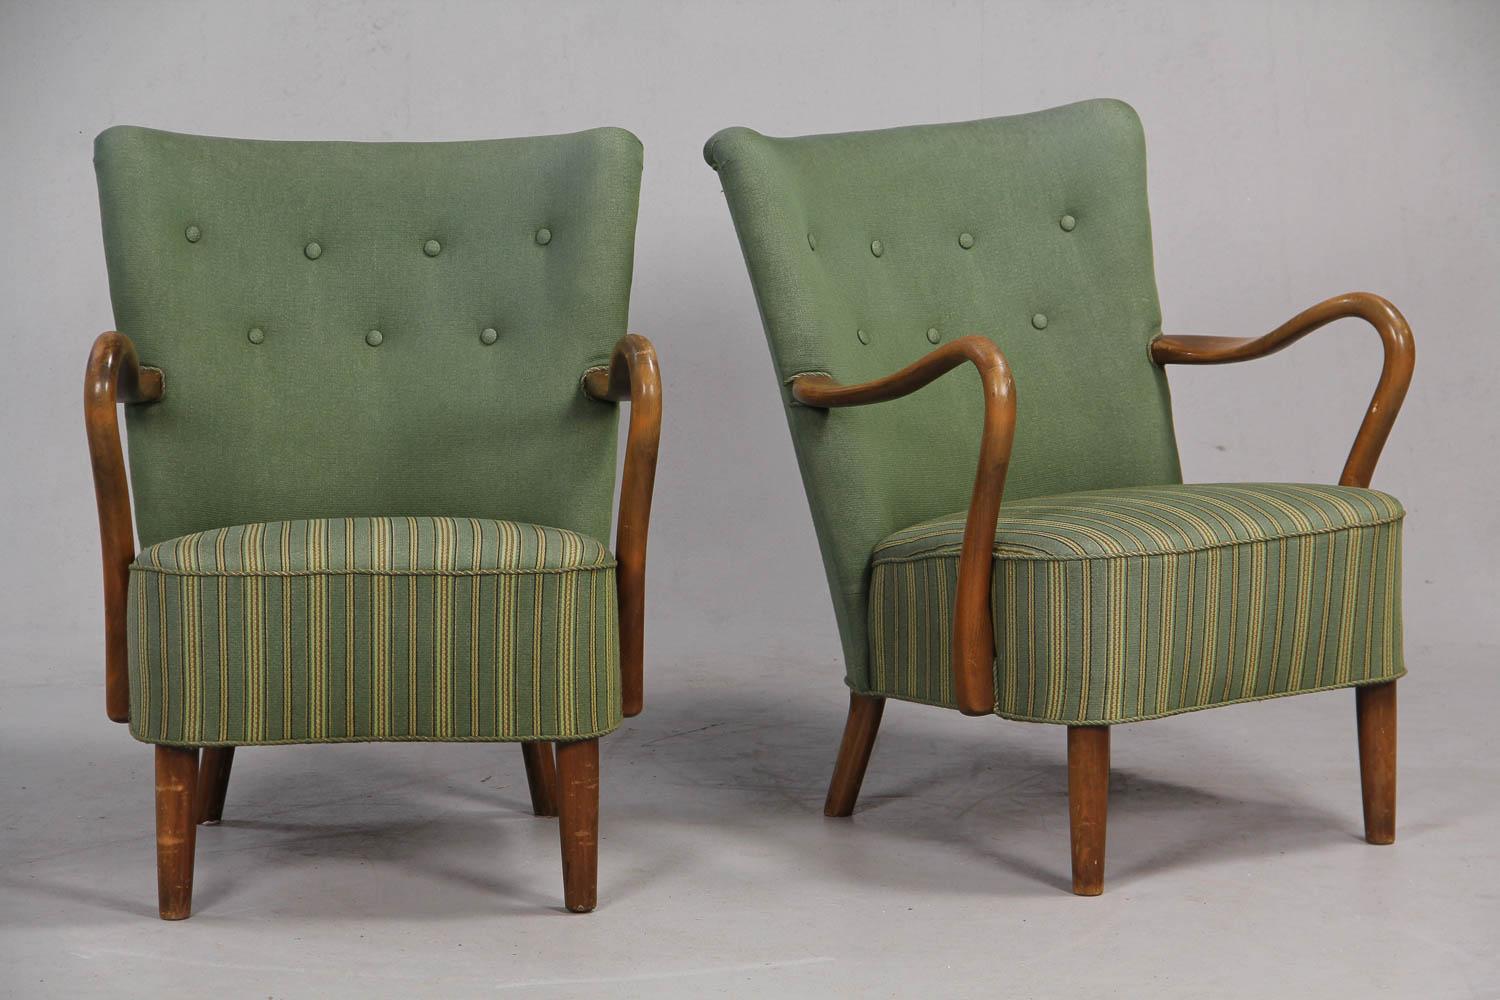 Pair of open armchairs by Danish designer Alfred Christensen, in beech, upholstered in light green wool, curved wooden arms and solid beech legs, 1940s-1950s. Produced by Slagelse Møbelværk.